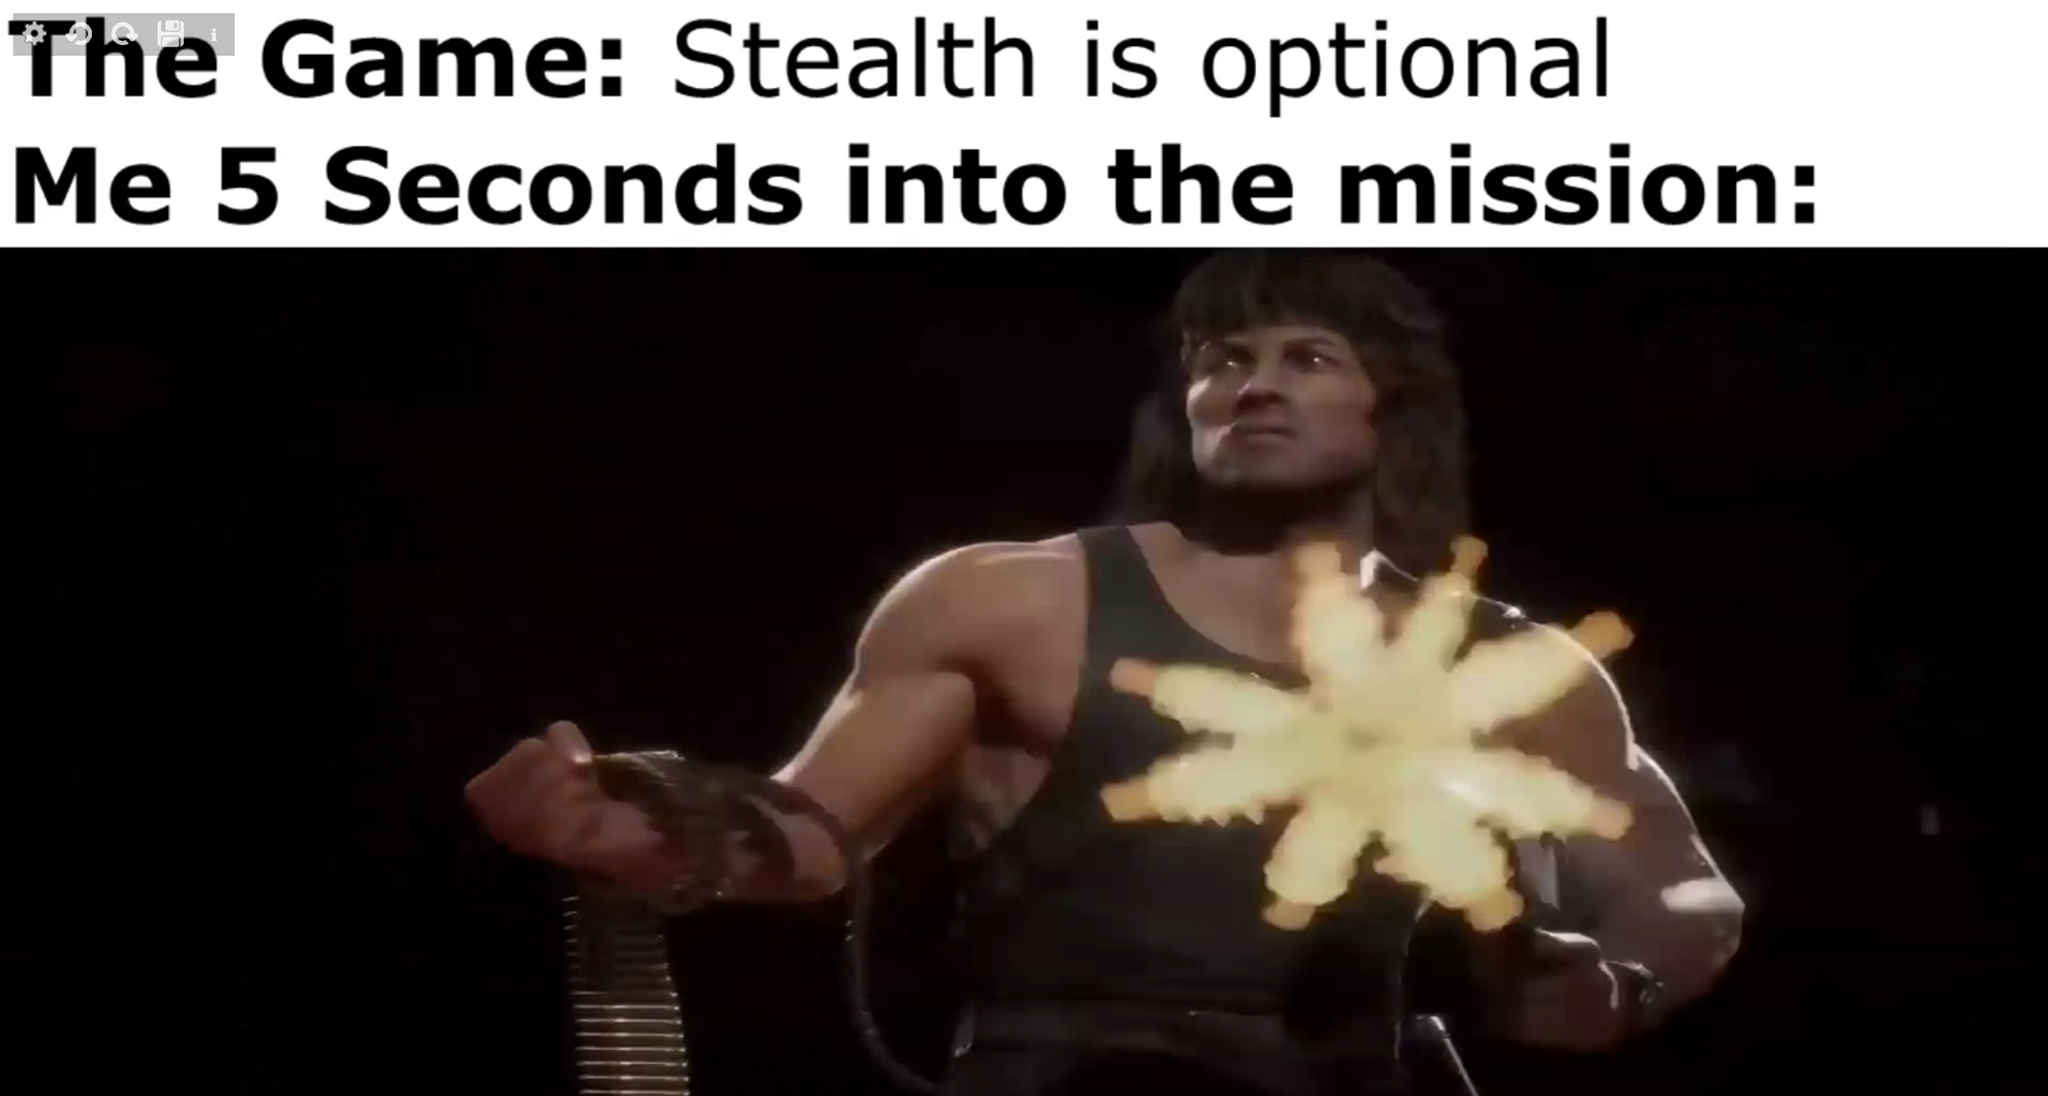 funny gaming memes - song - The Game Stealth is optional Me 5 Seconds into the mission